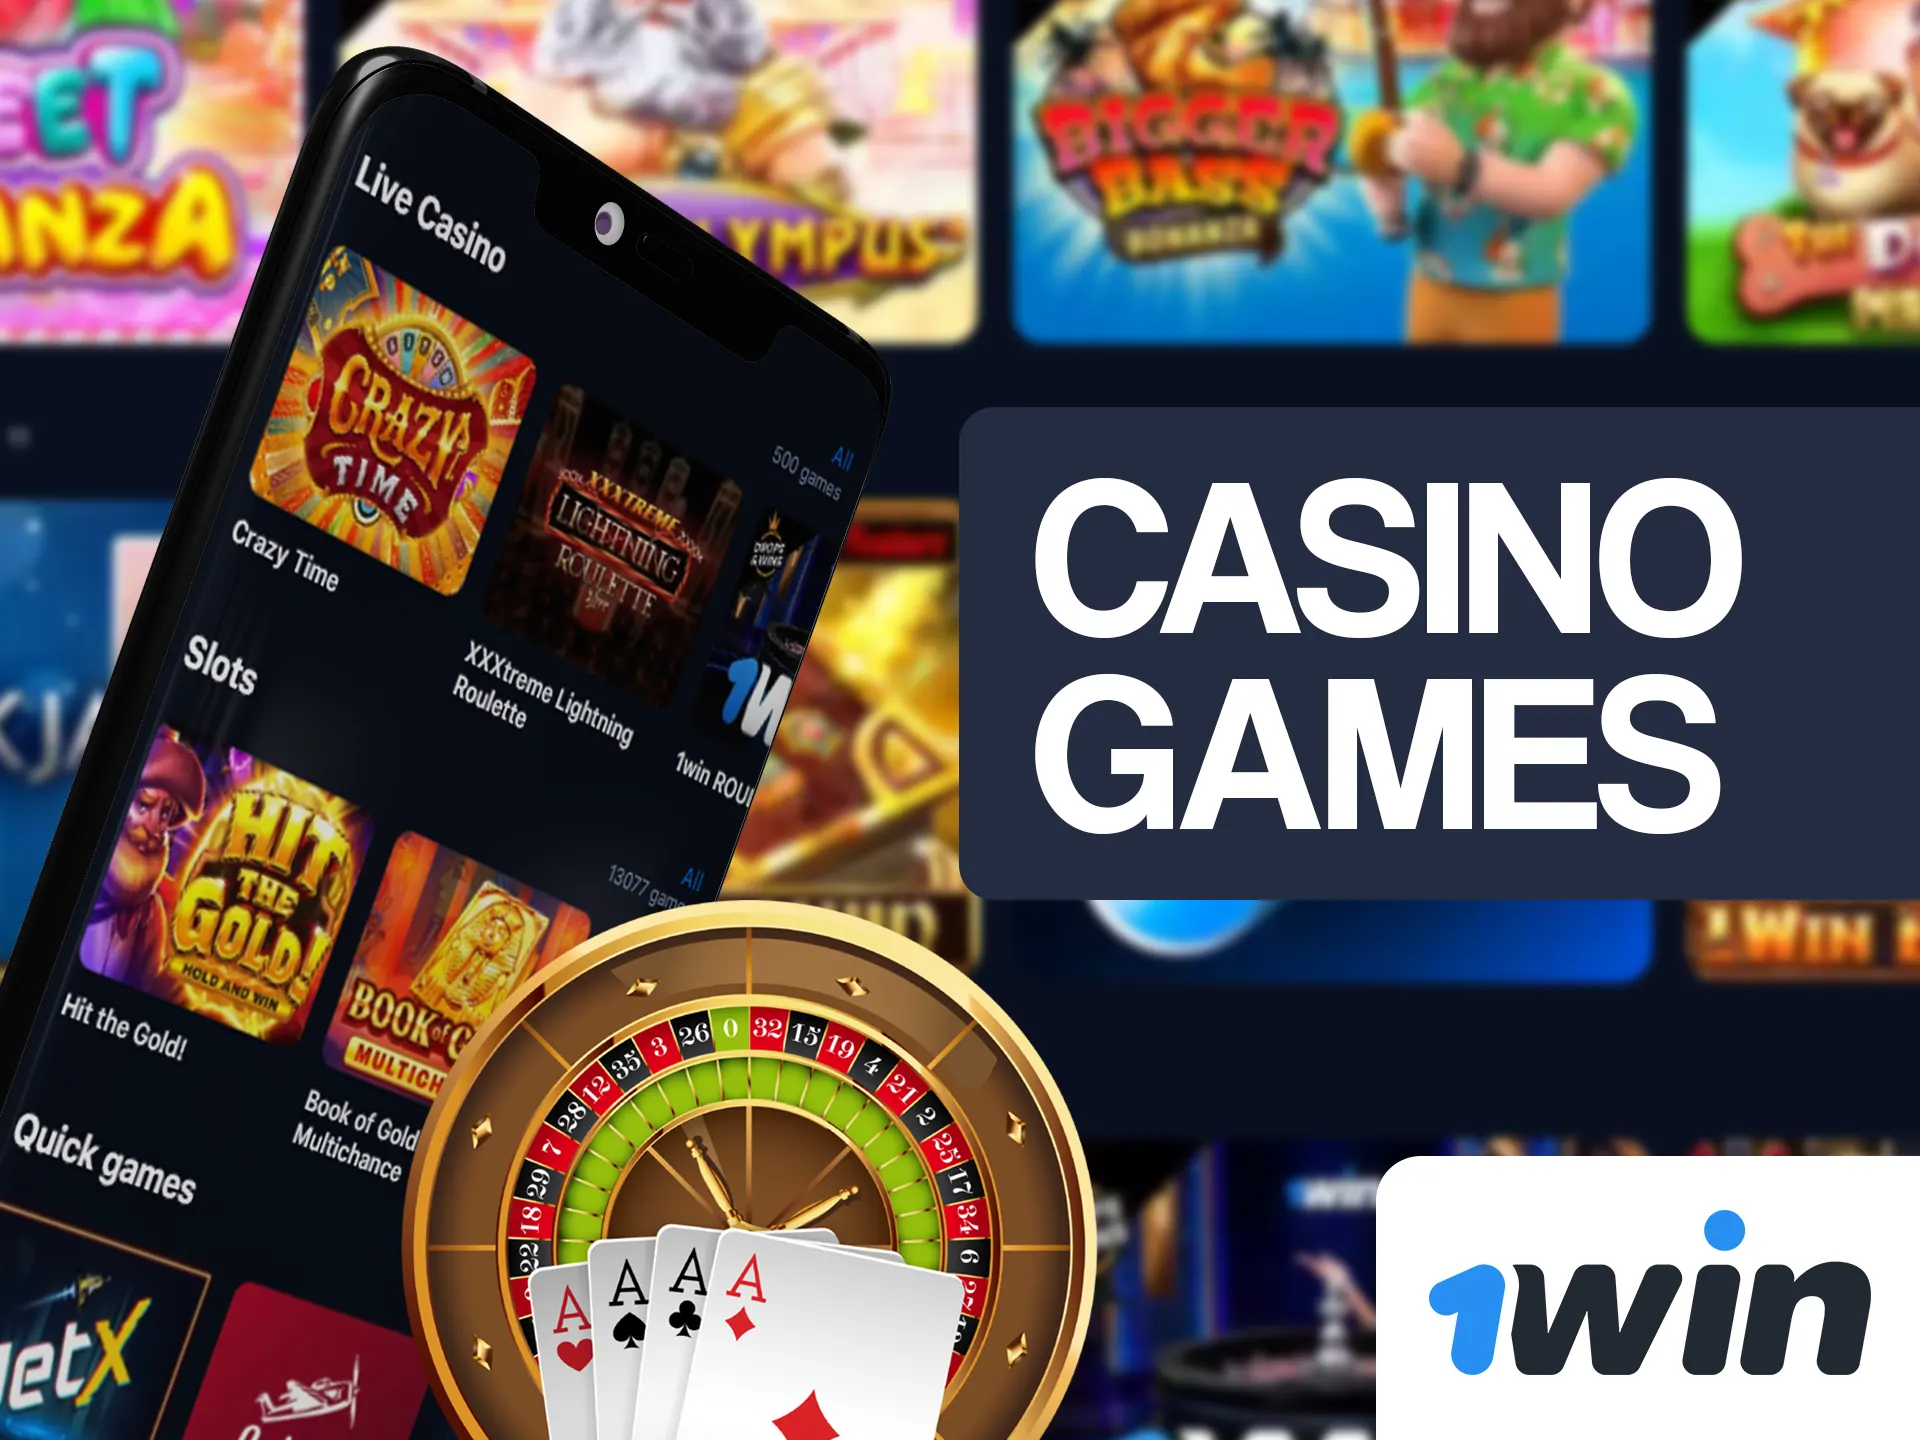 Search for your favourite casino games at 1win.